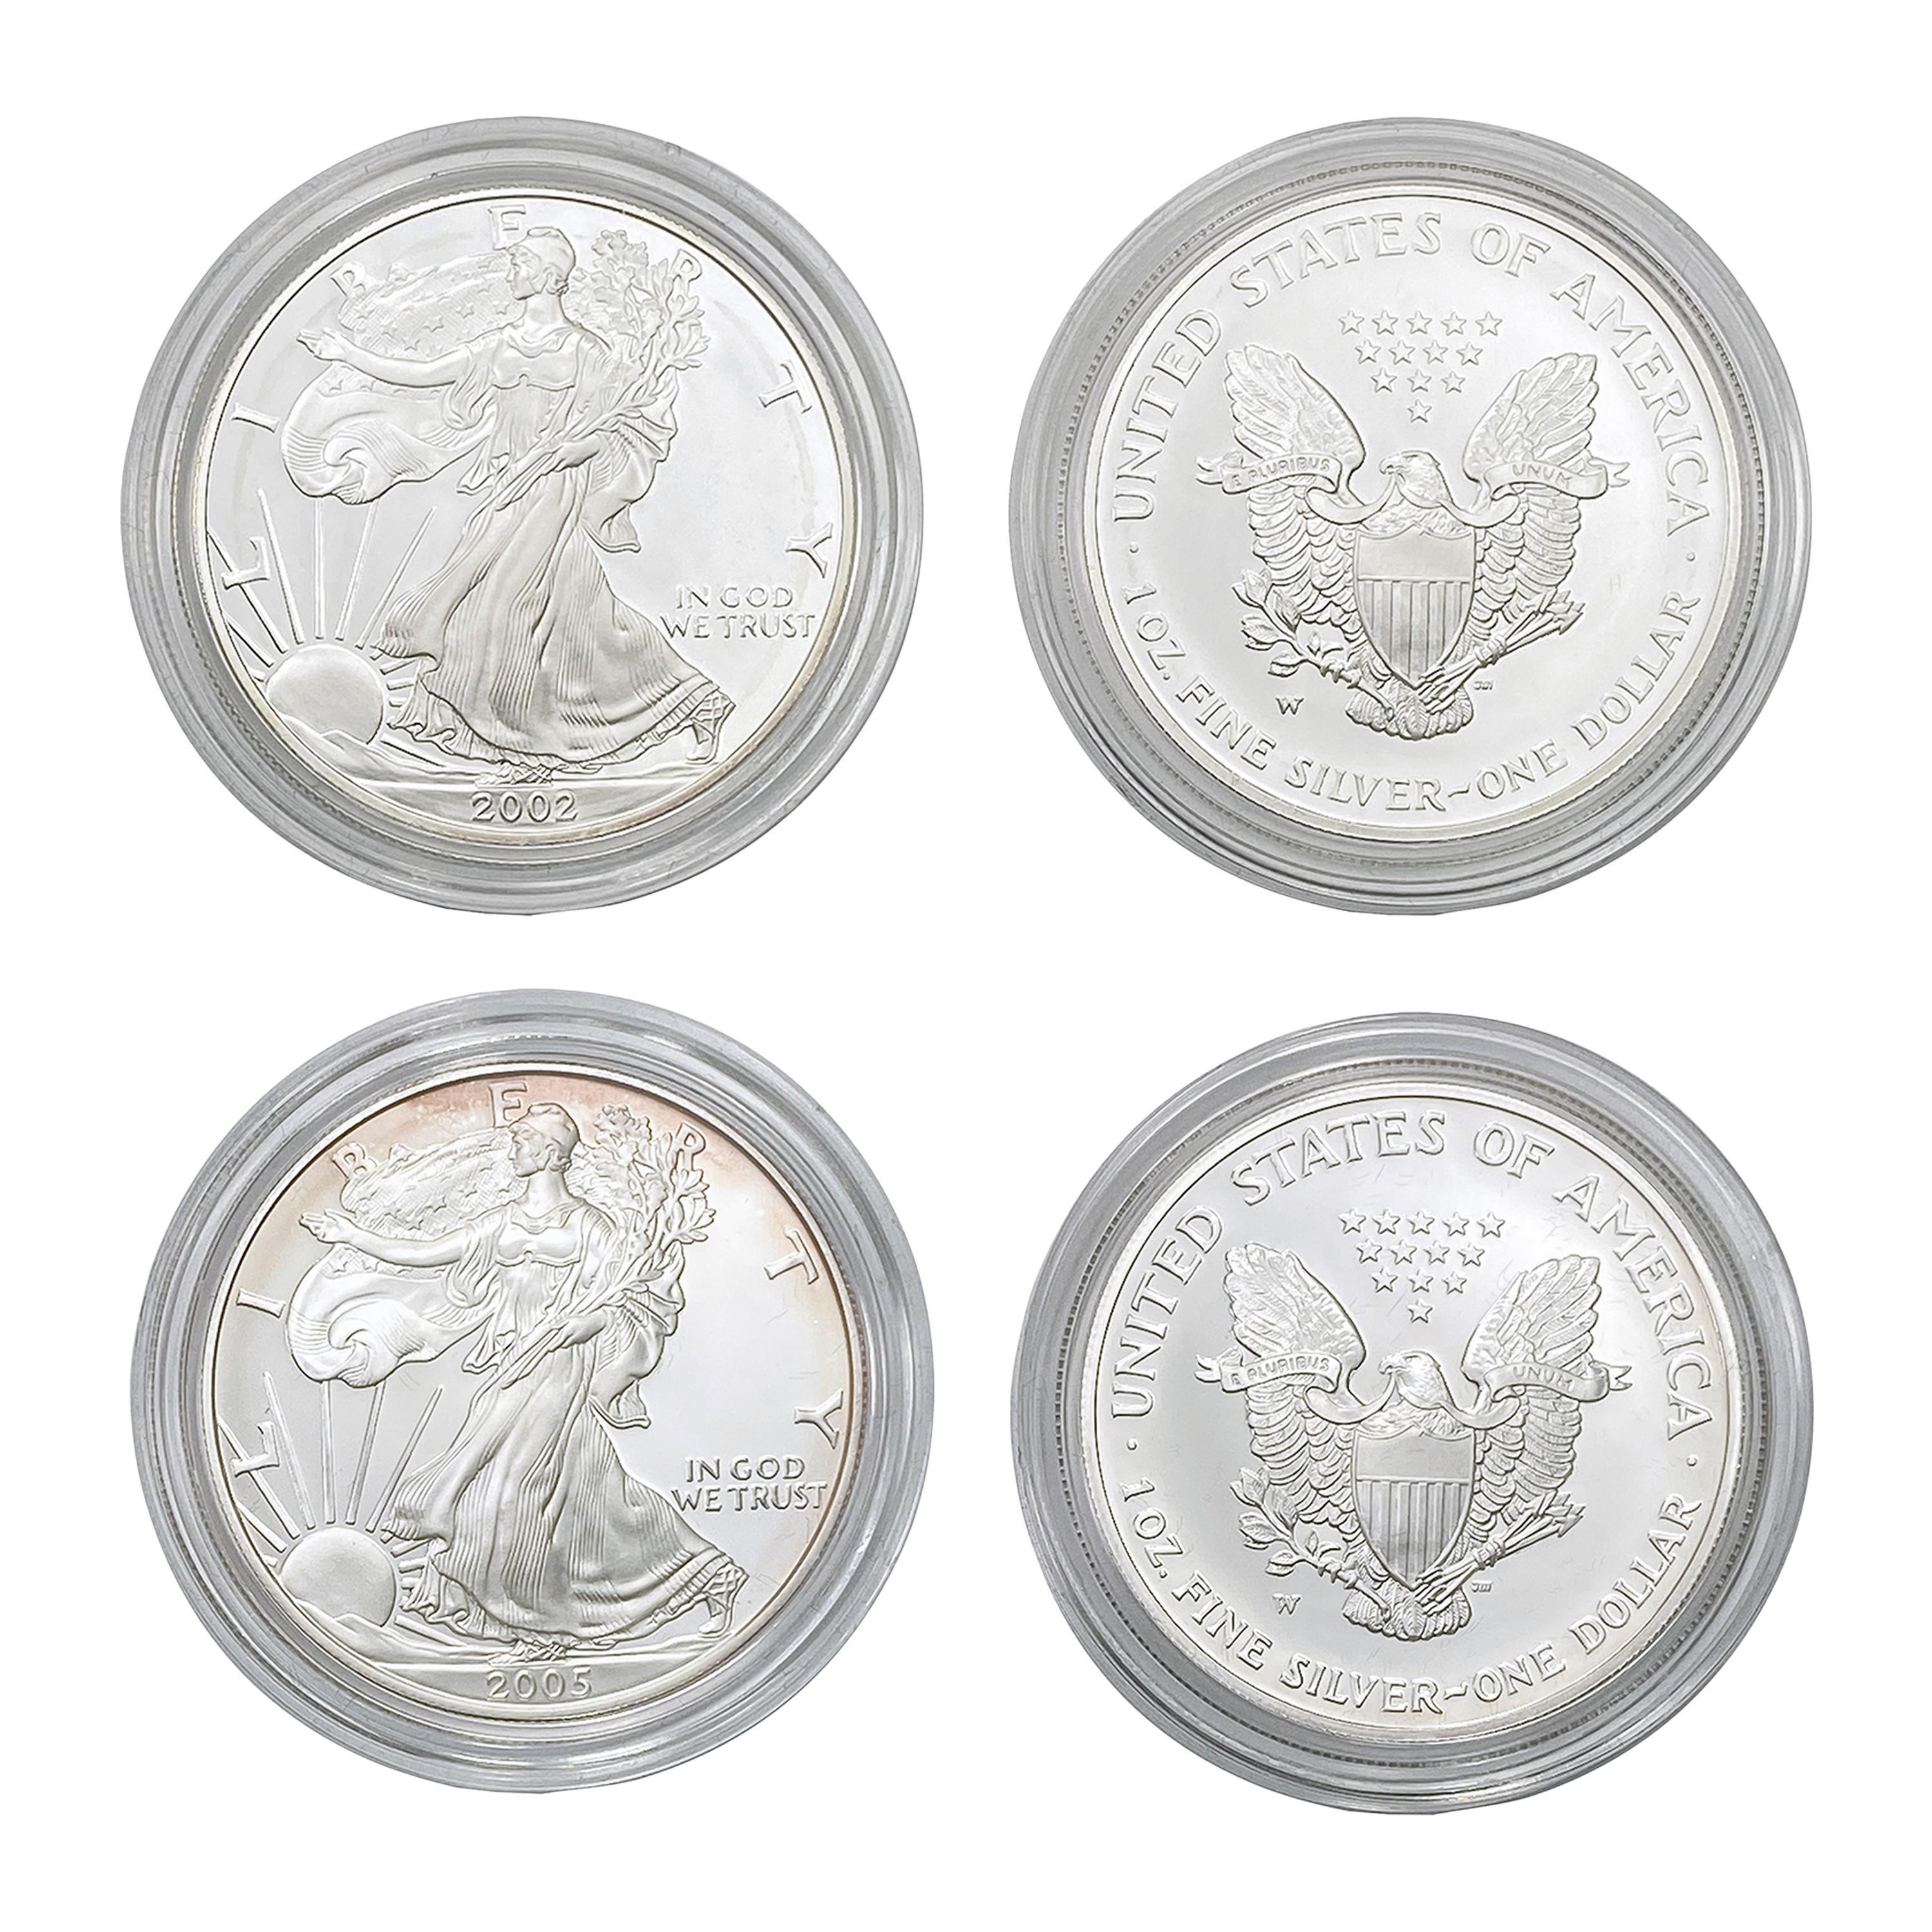 2002, 2005 US 1oz Silver Eagle Proof Coins [2 Coin